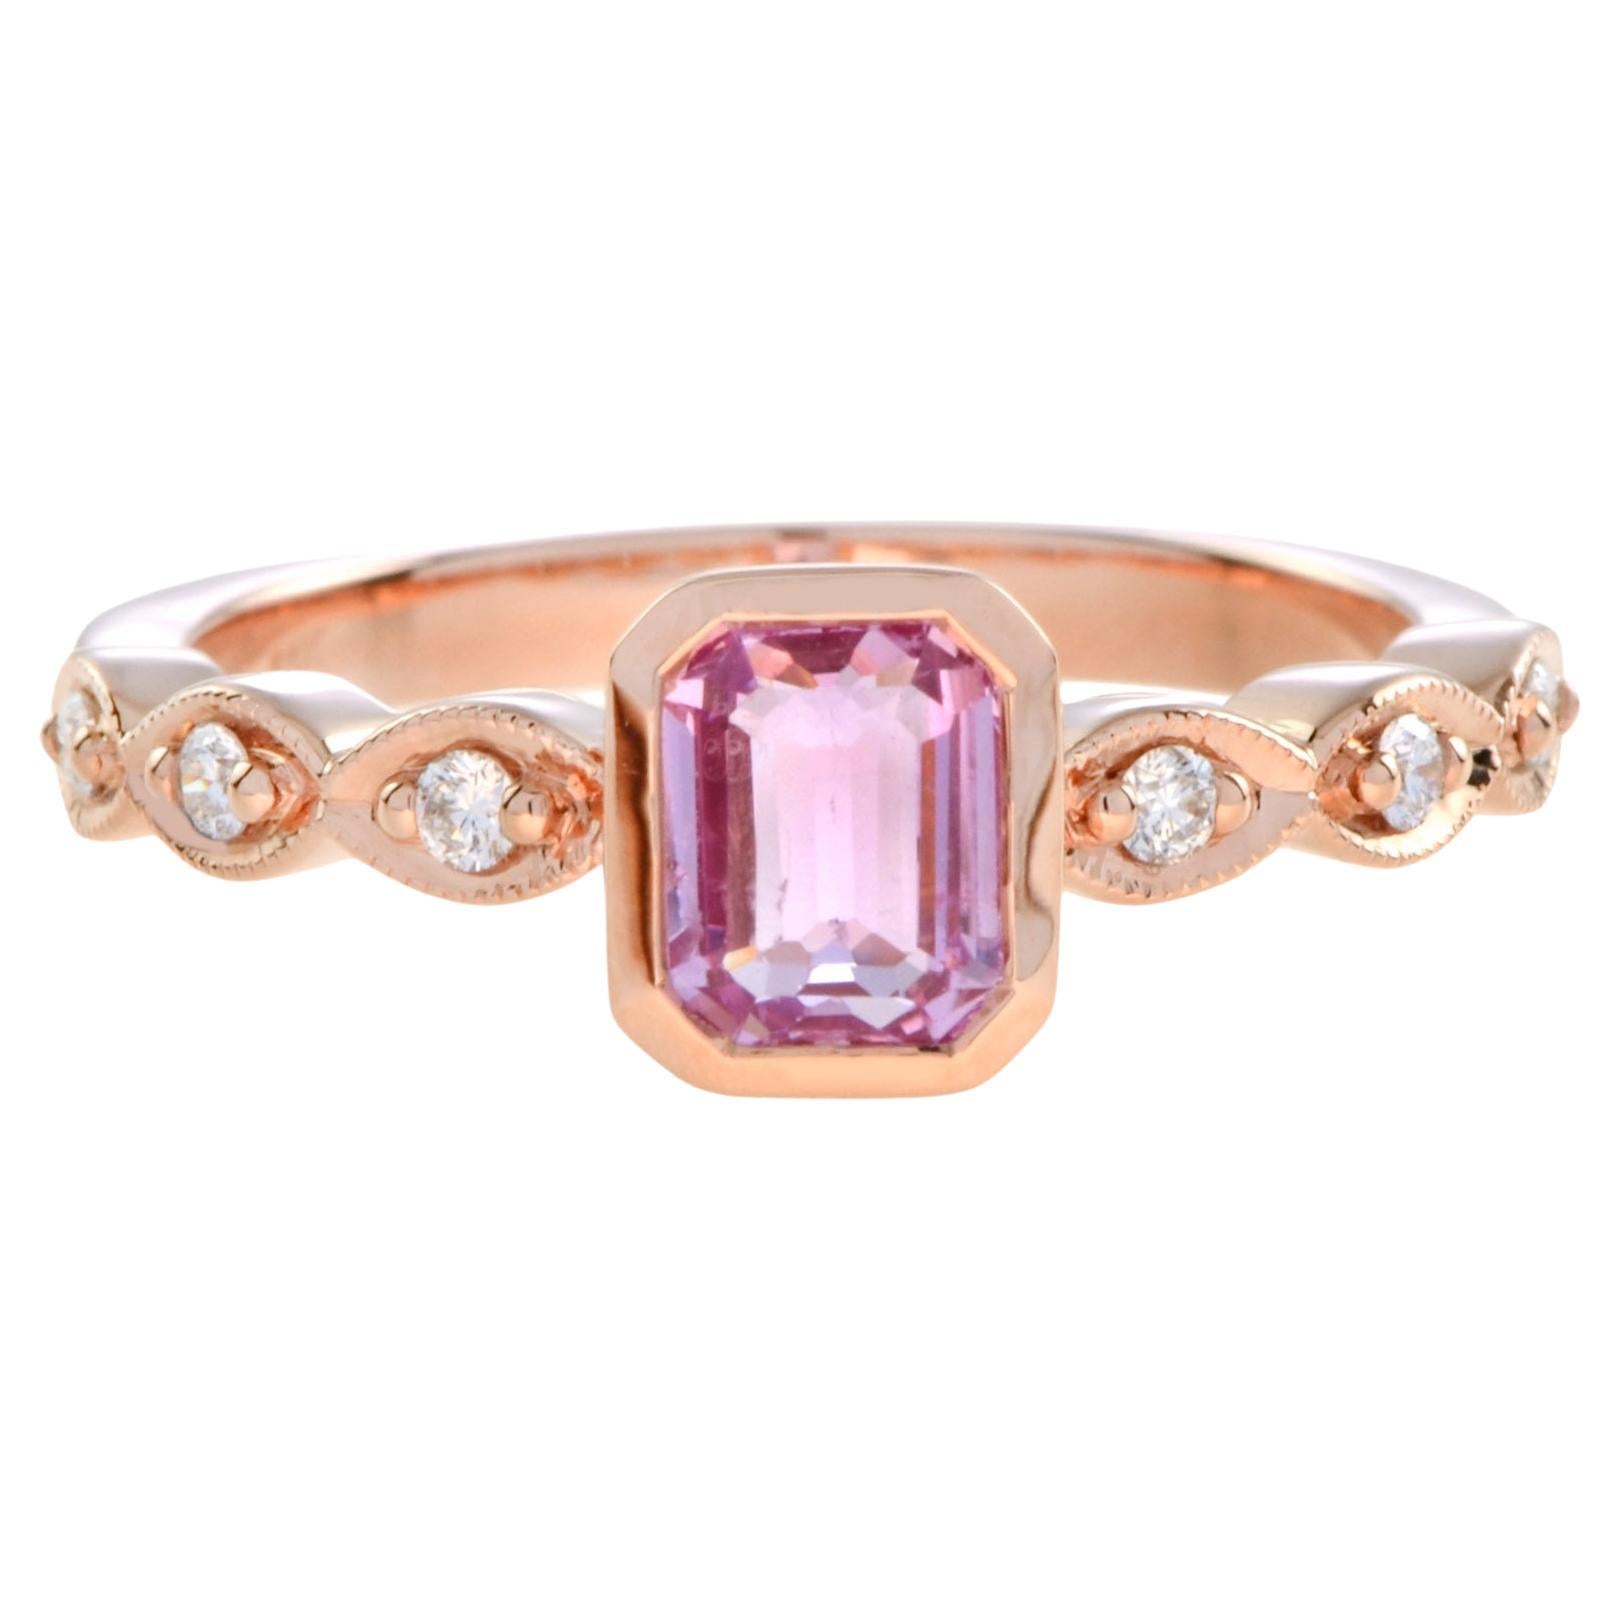 Certified Pink Sapphire and Diamond Engagement Ring in 18K Rose Gold